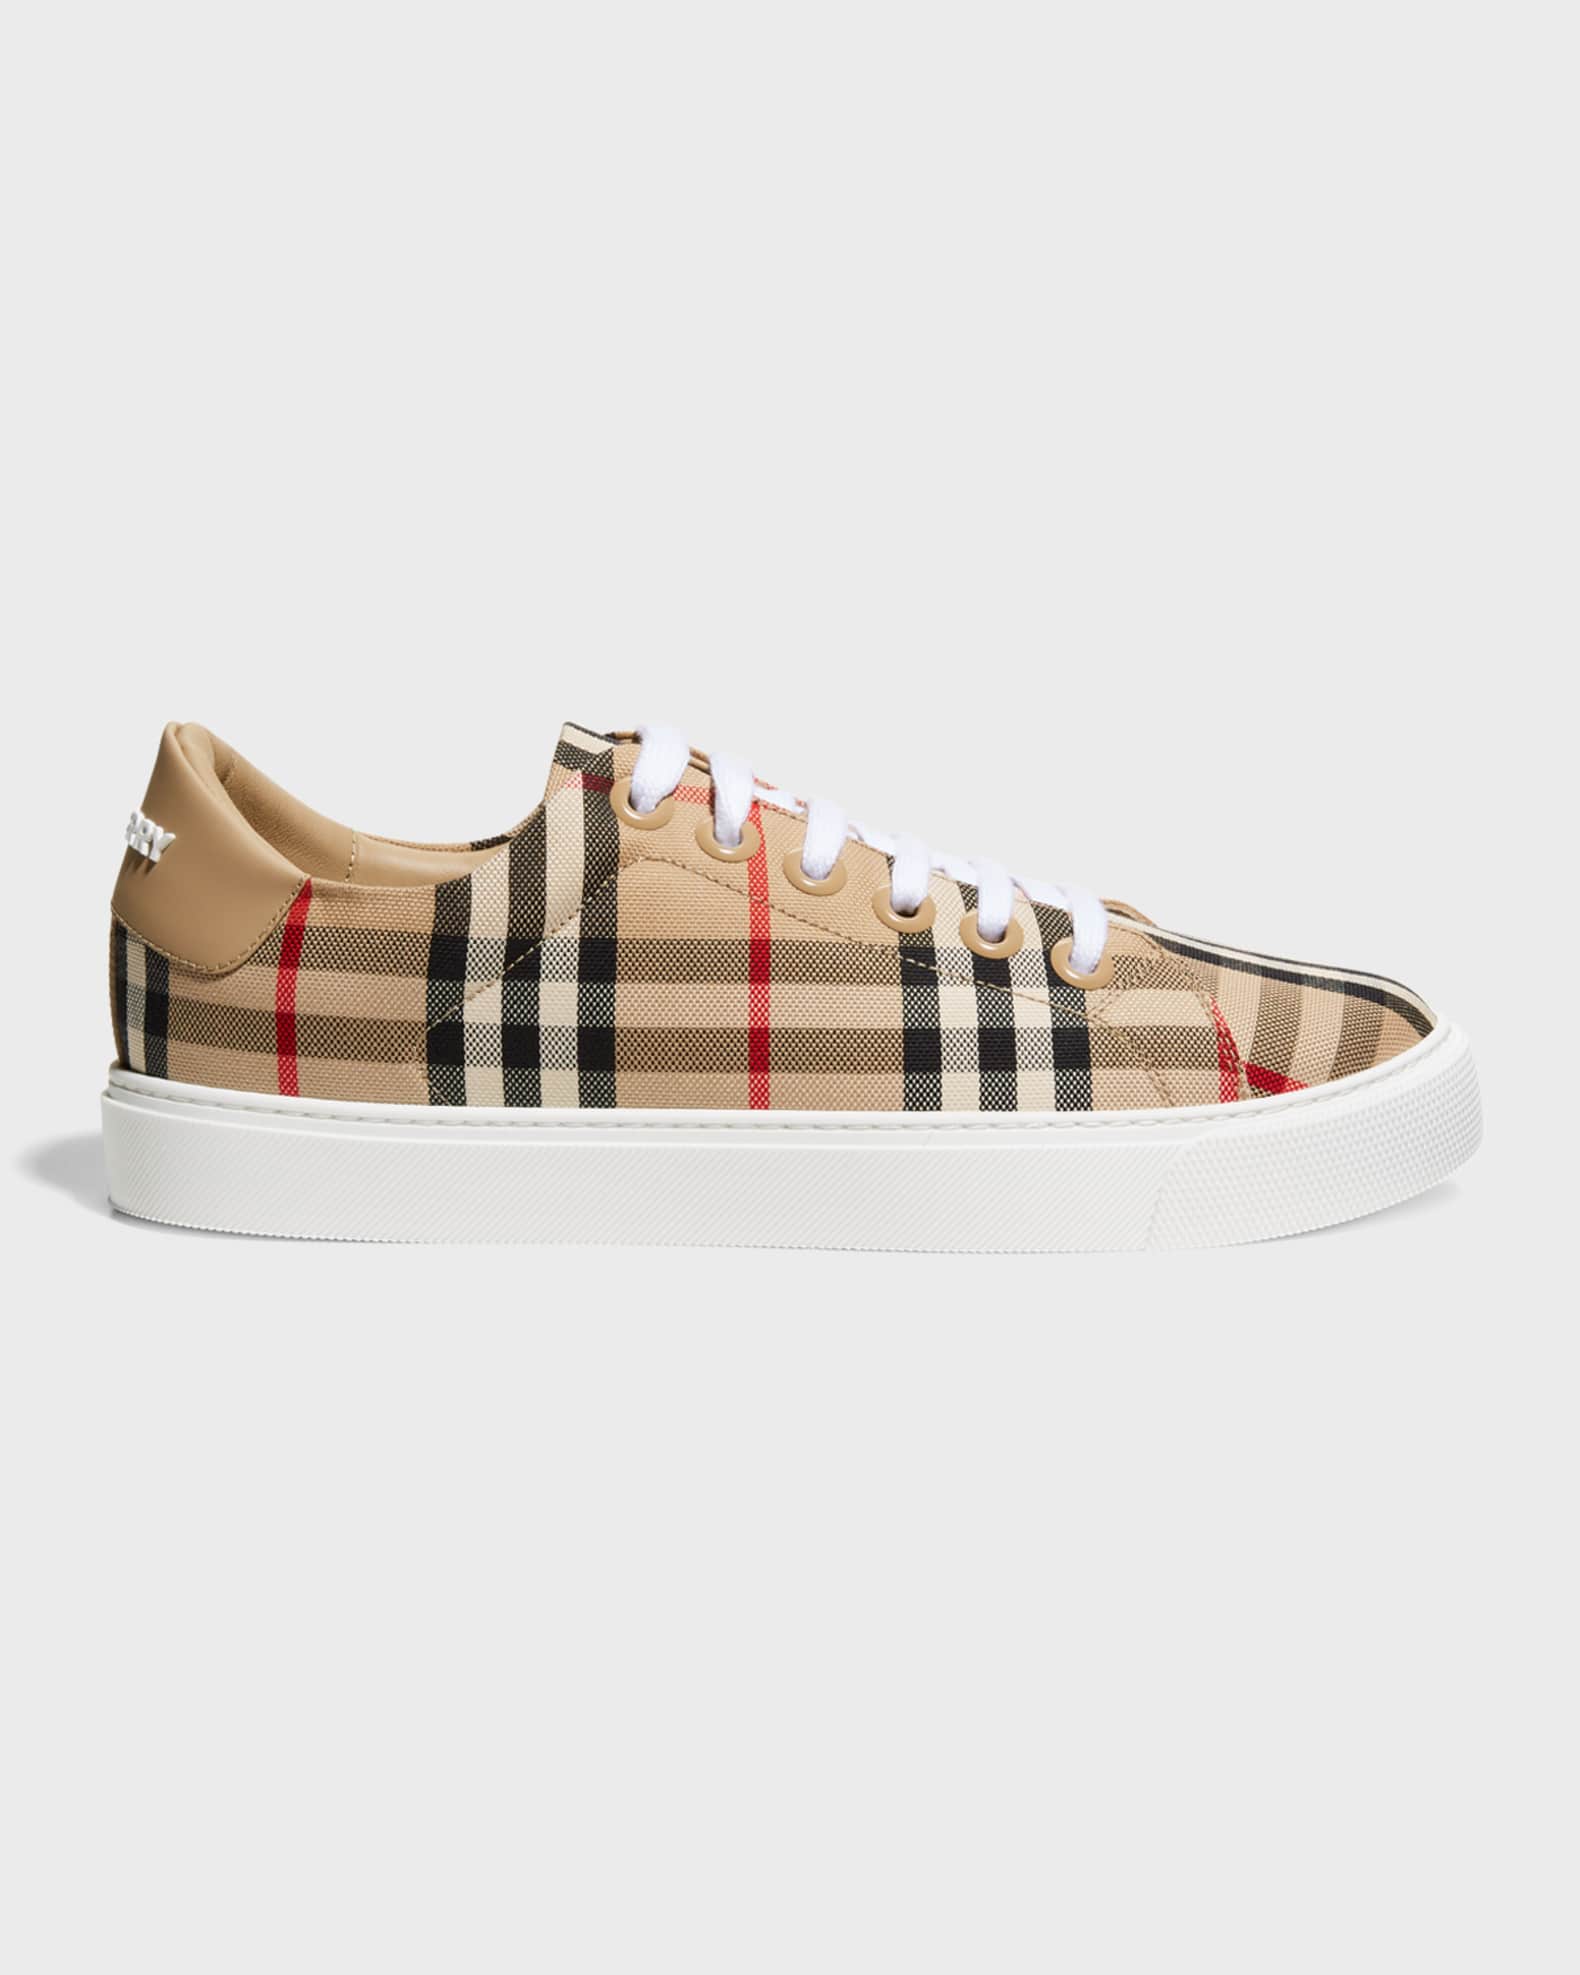 Monogram print cotton lace-up sneakers - Burberry - Girls